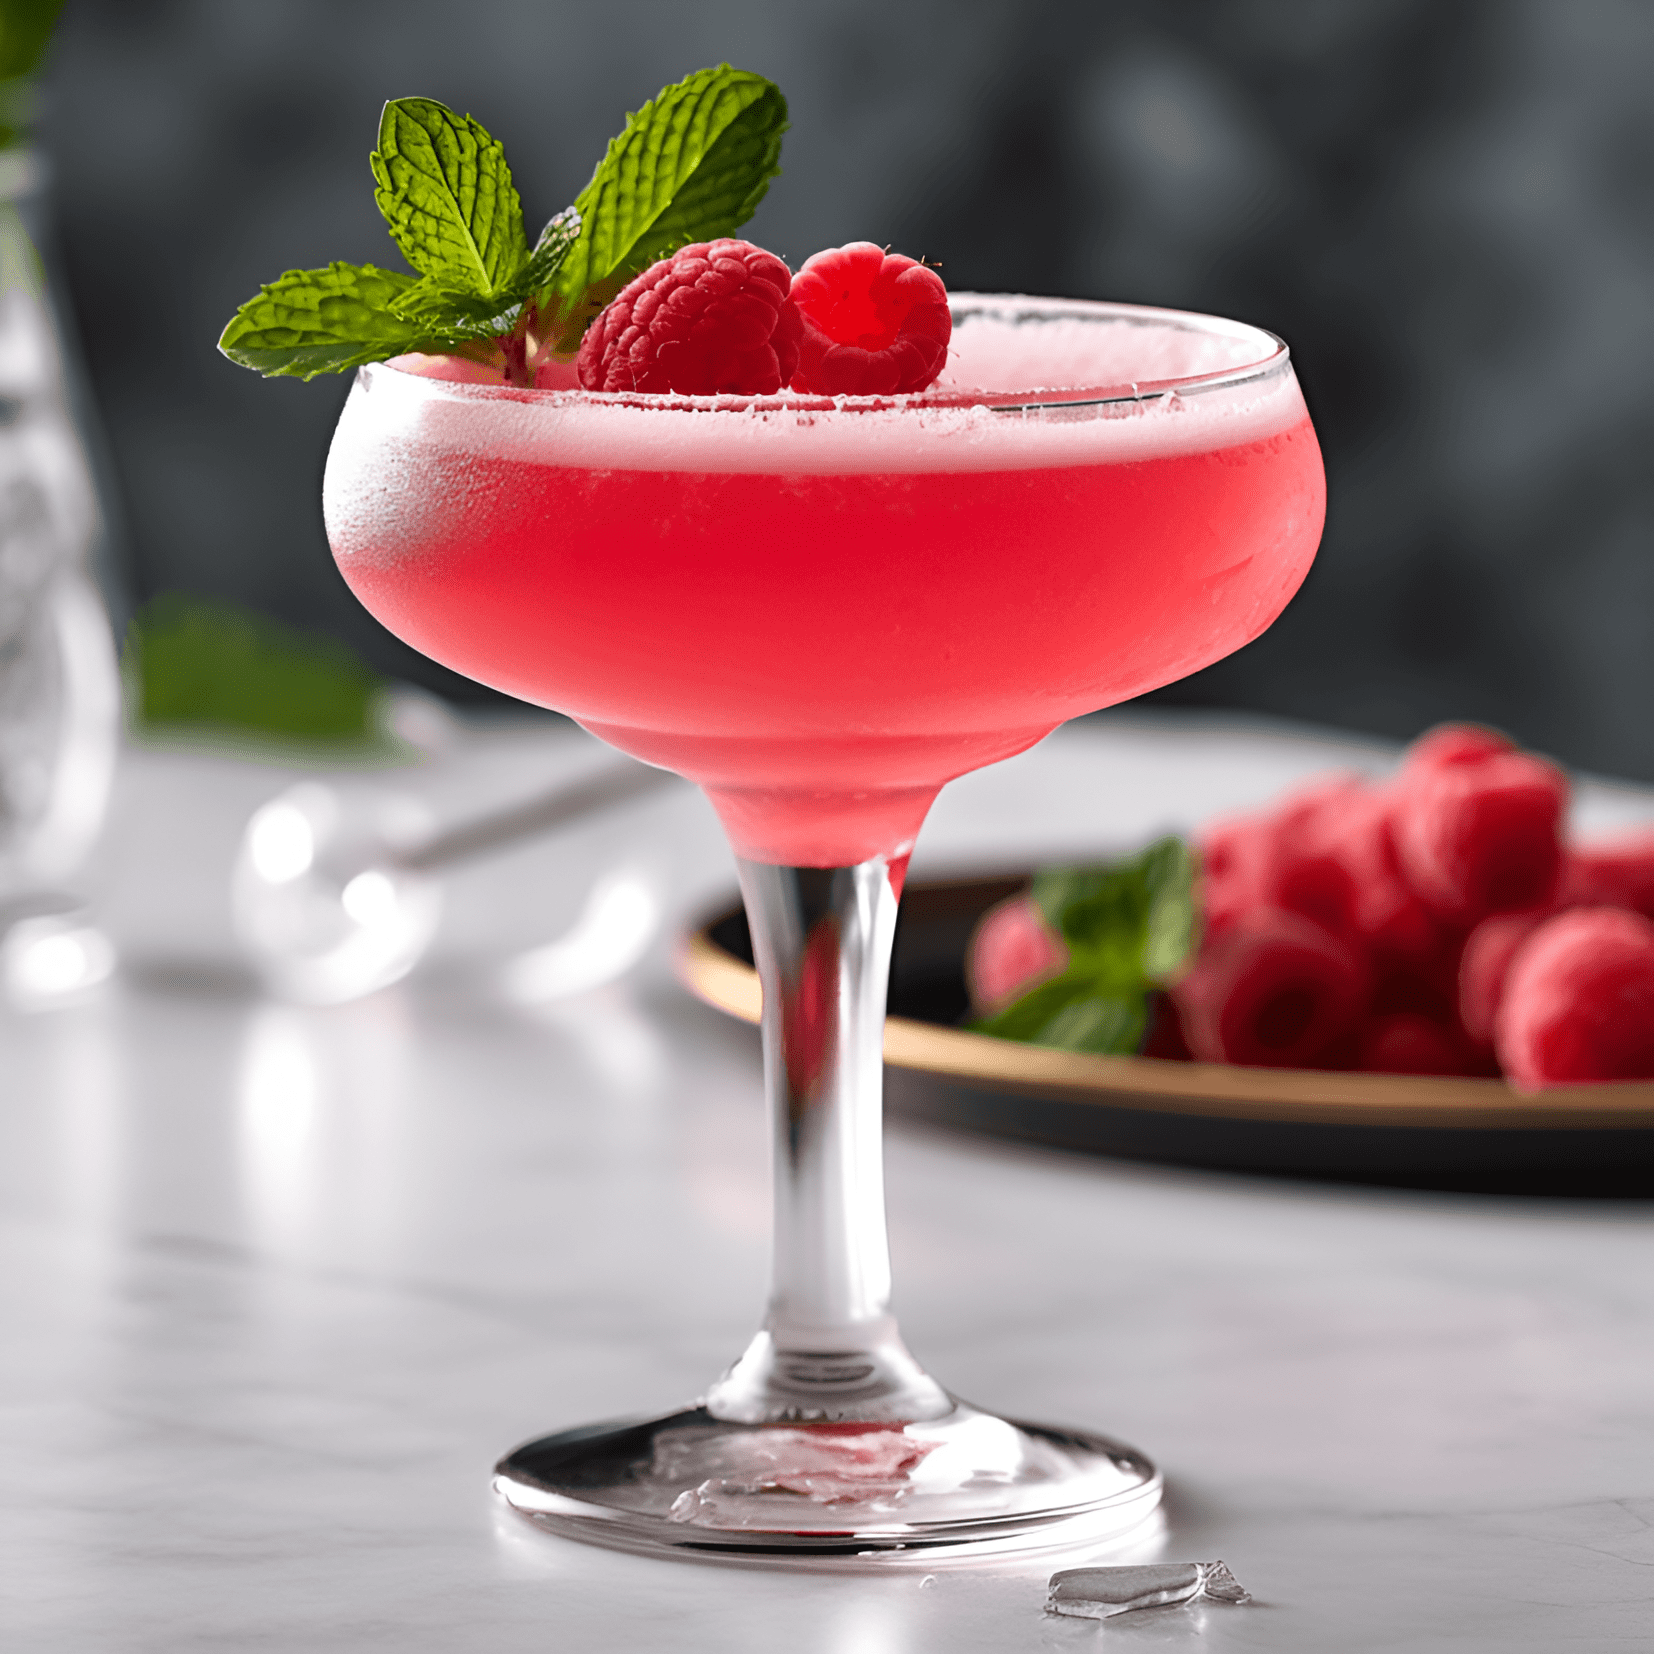 Raspberry Beret Cocktail Recipe - The Raspberry Beret is a sweet, fruity, and slightly tangy cocktail. It has a refreshing and light taste, with a hint of tartness from the raspberries and a smooth, velvety texture from the cream.